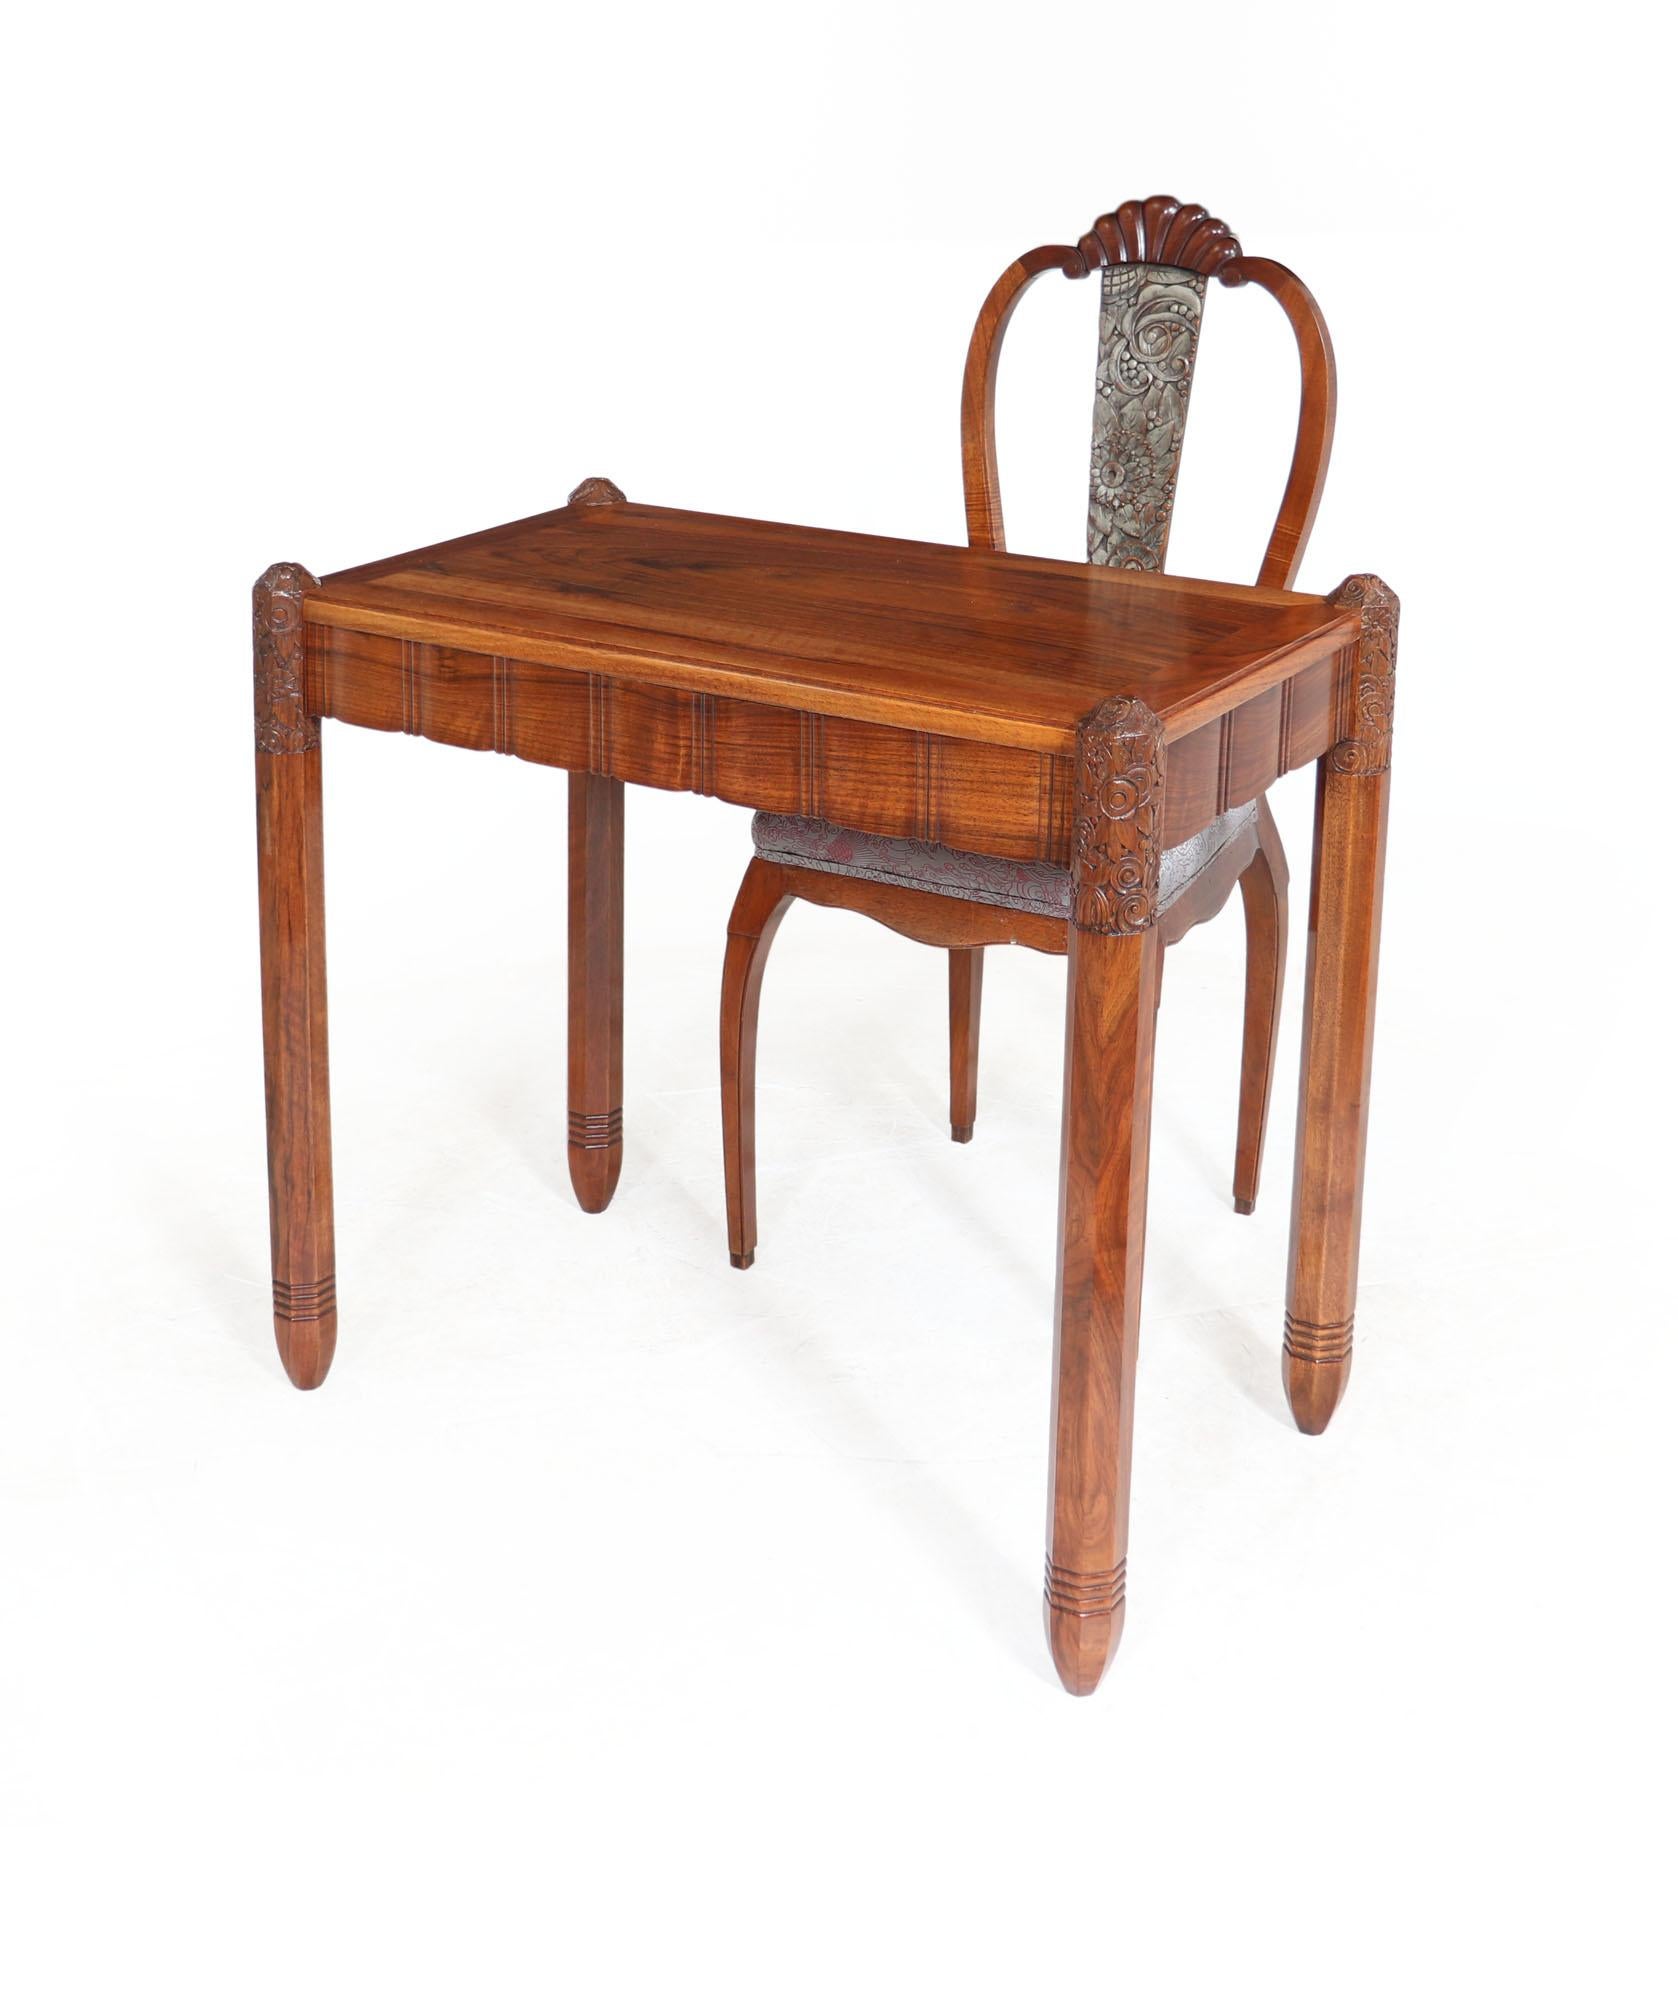 DESK AND CHAIR BY SUE ET MARE
A French Art Deco ladies writing desk and chair of exceptional quality by Louis Sue and Andre Mare produced around 1925, it is solid walnut with octagonal legs with ornate carving to the top, the sides are scalloped